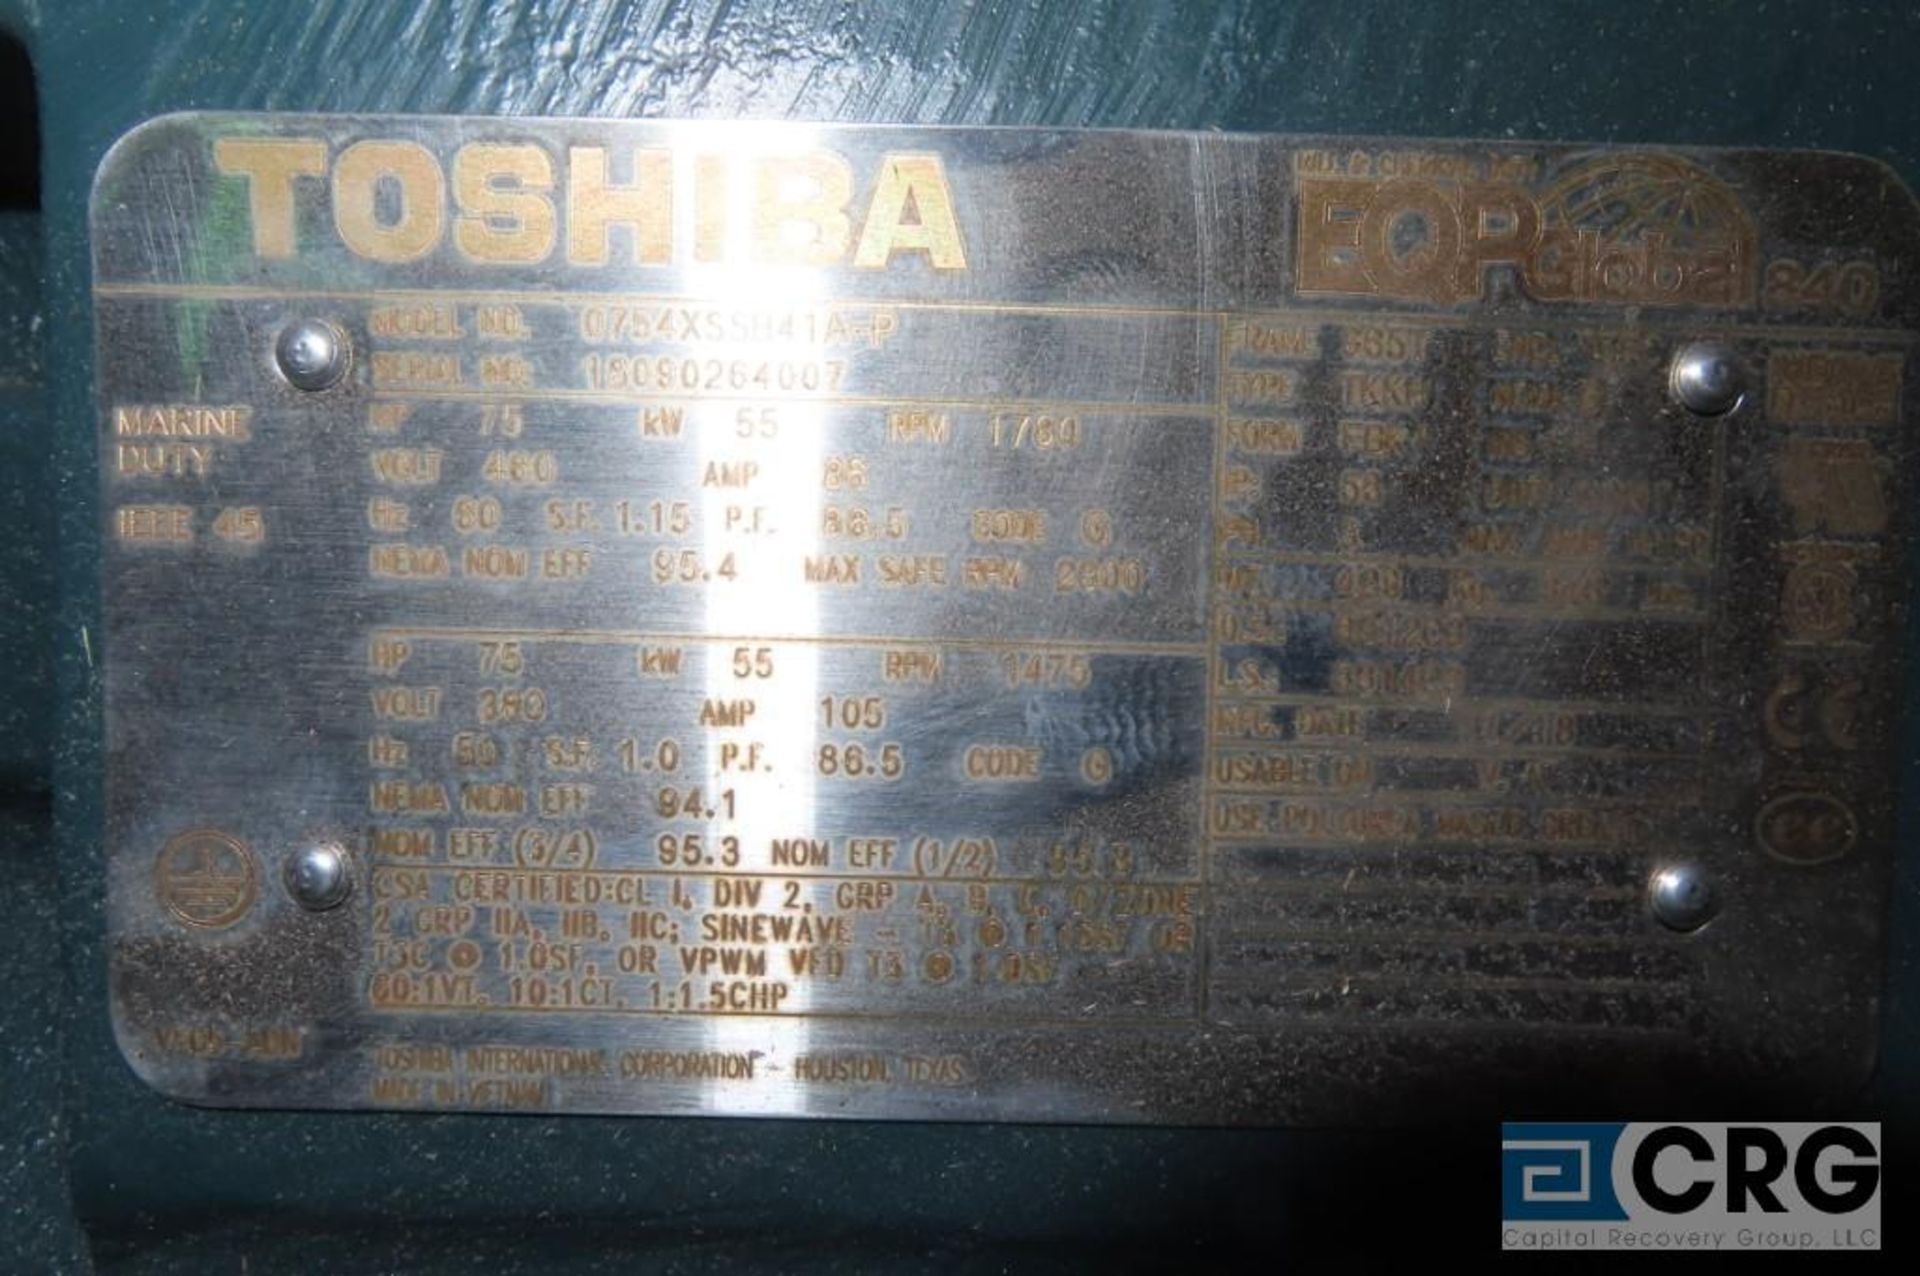 2018 Toshiba 0754X55341A-P motor, 75 hp, 1780 RPM, 385T frame, s/n 1808264007 (never installed) - - Image 3 of 3